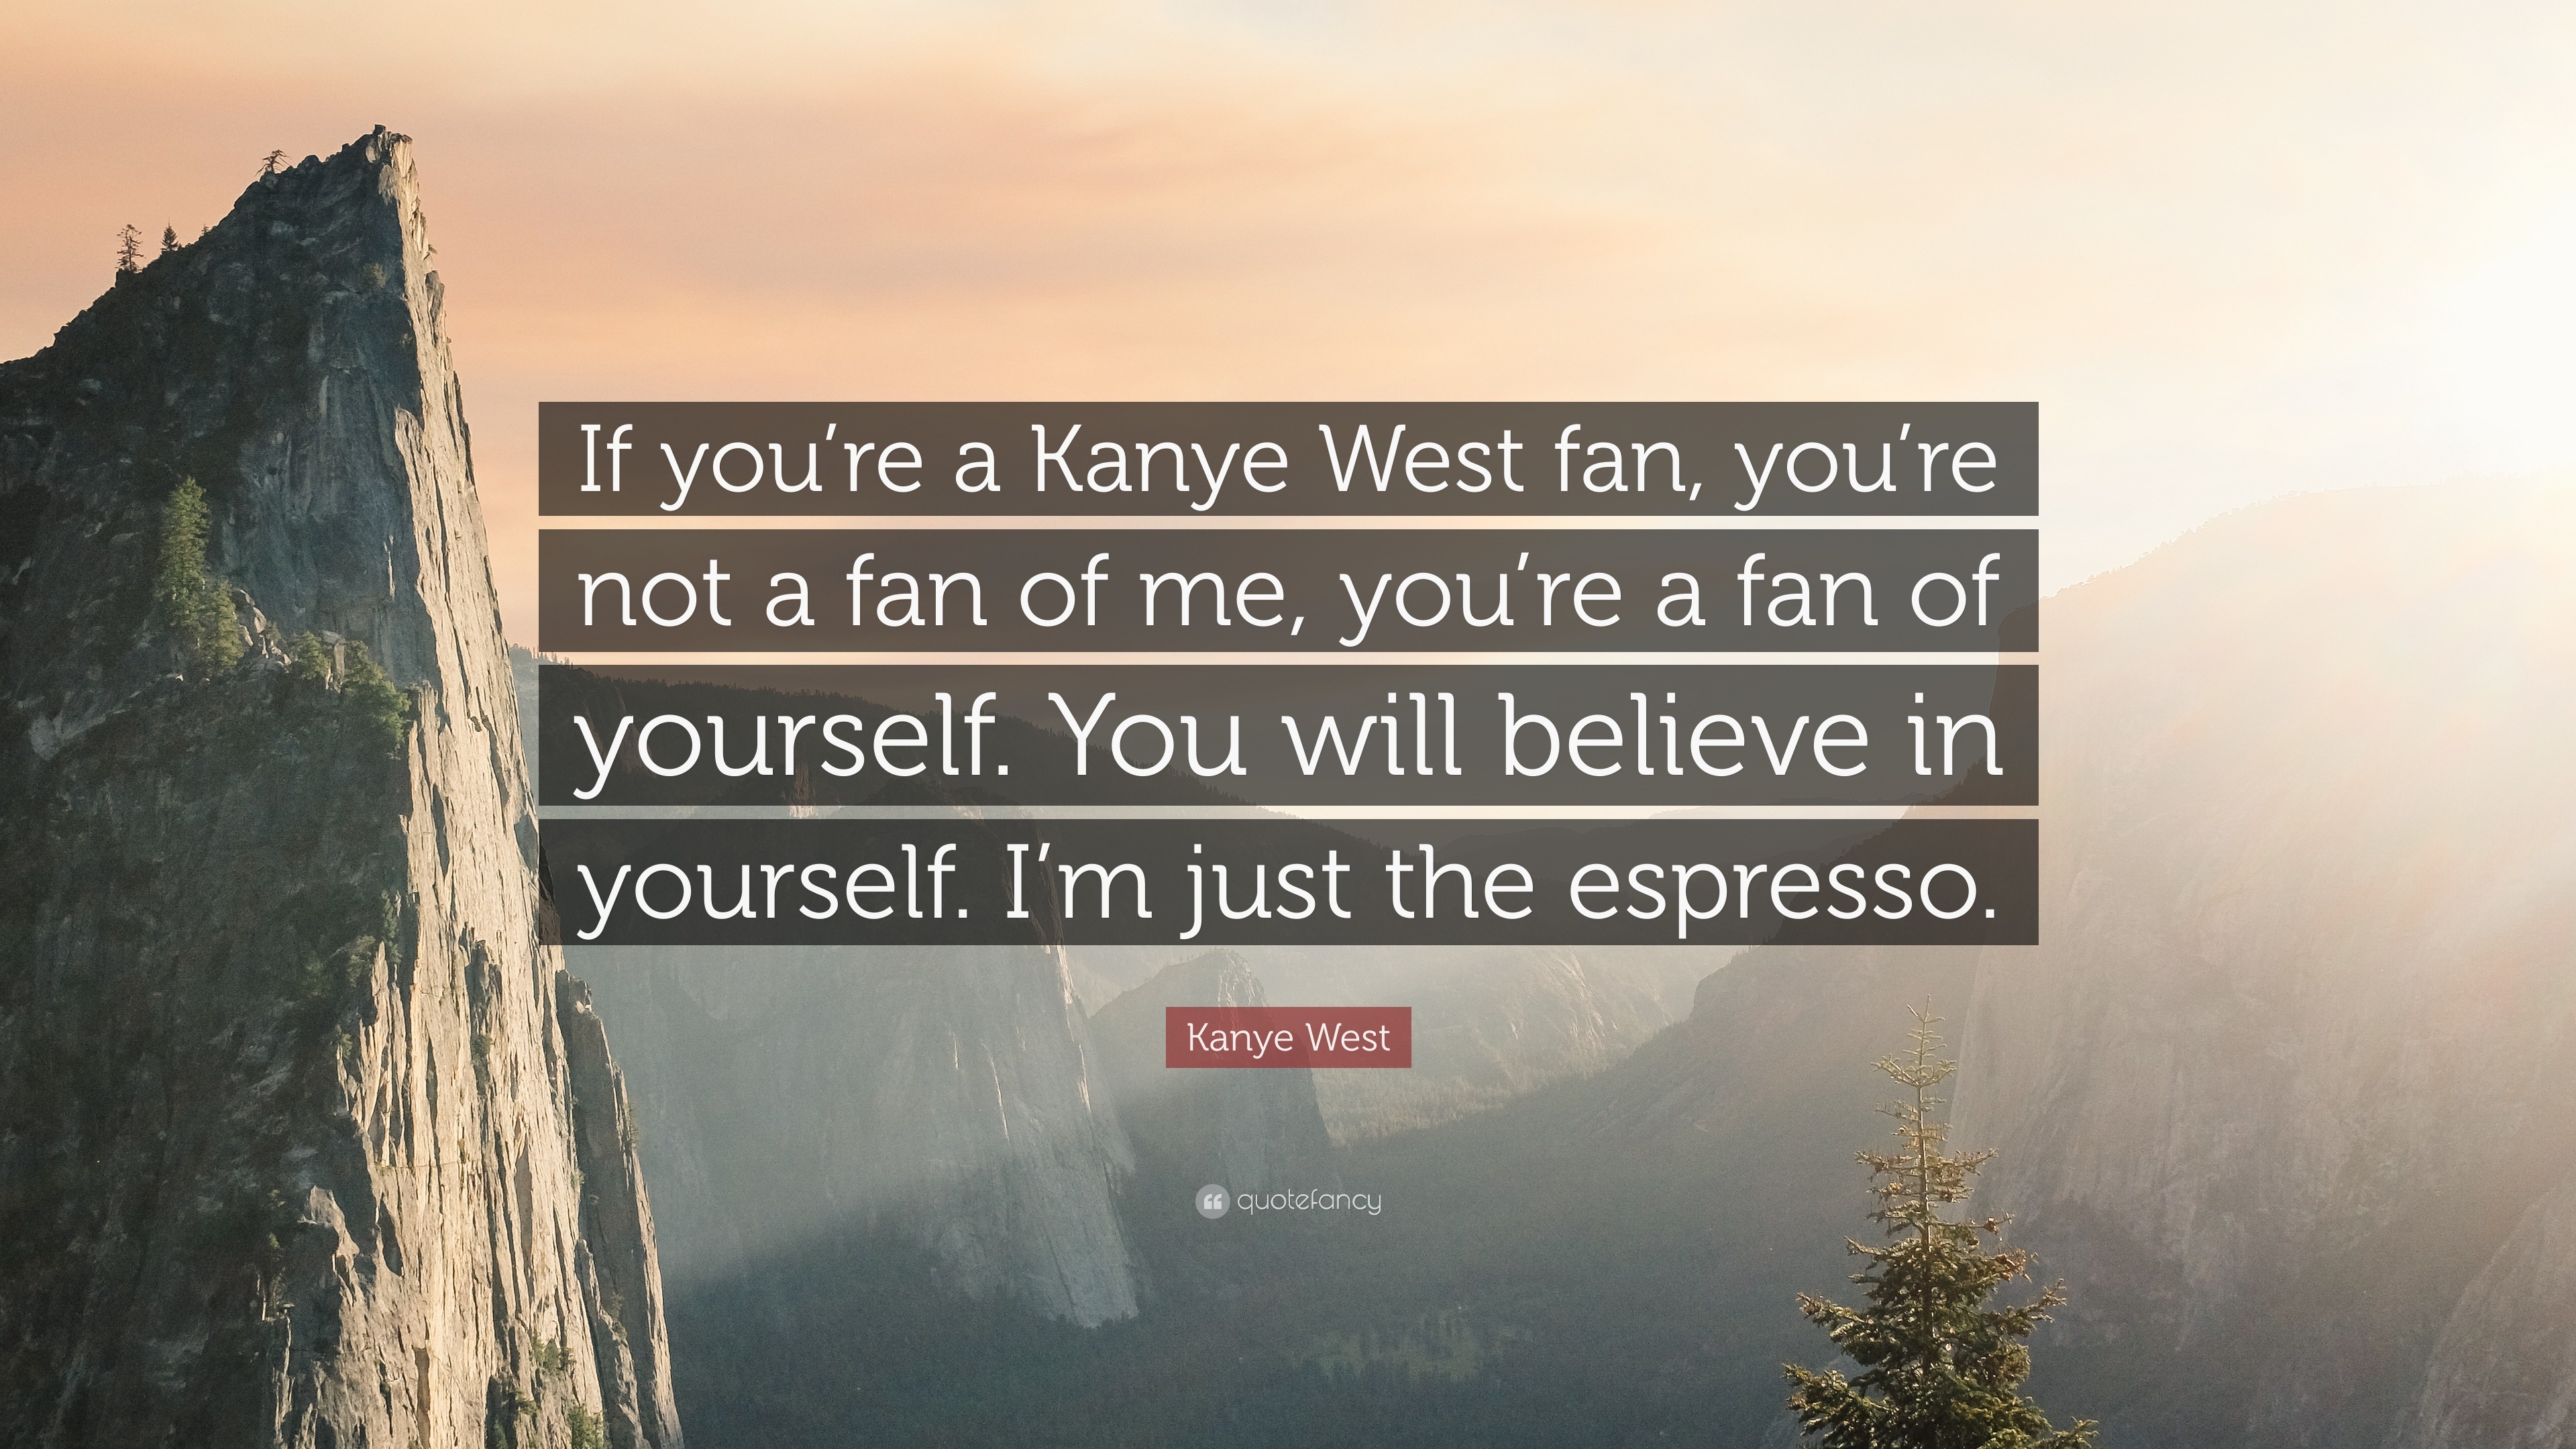 Kanye West Quote: “If you're a West fan, you're not a fan me, you're a fan of yourself. You will believe in yourself. just the...”